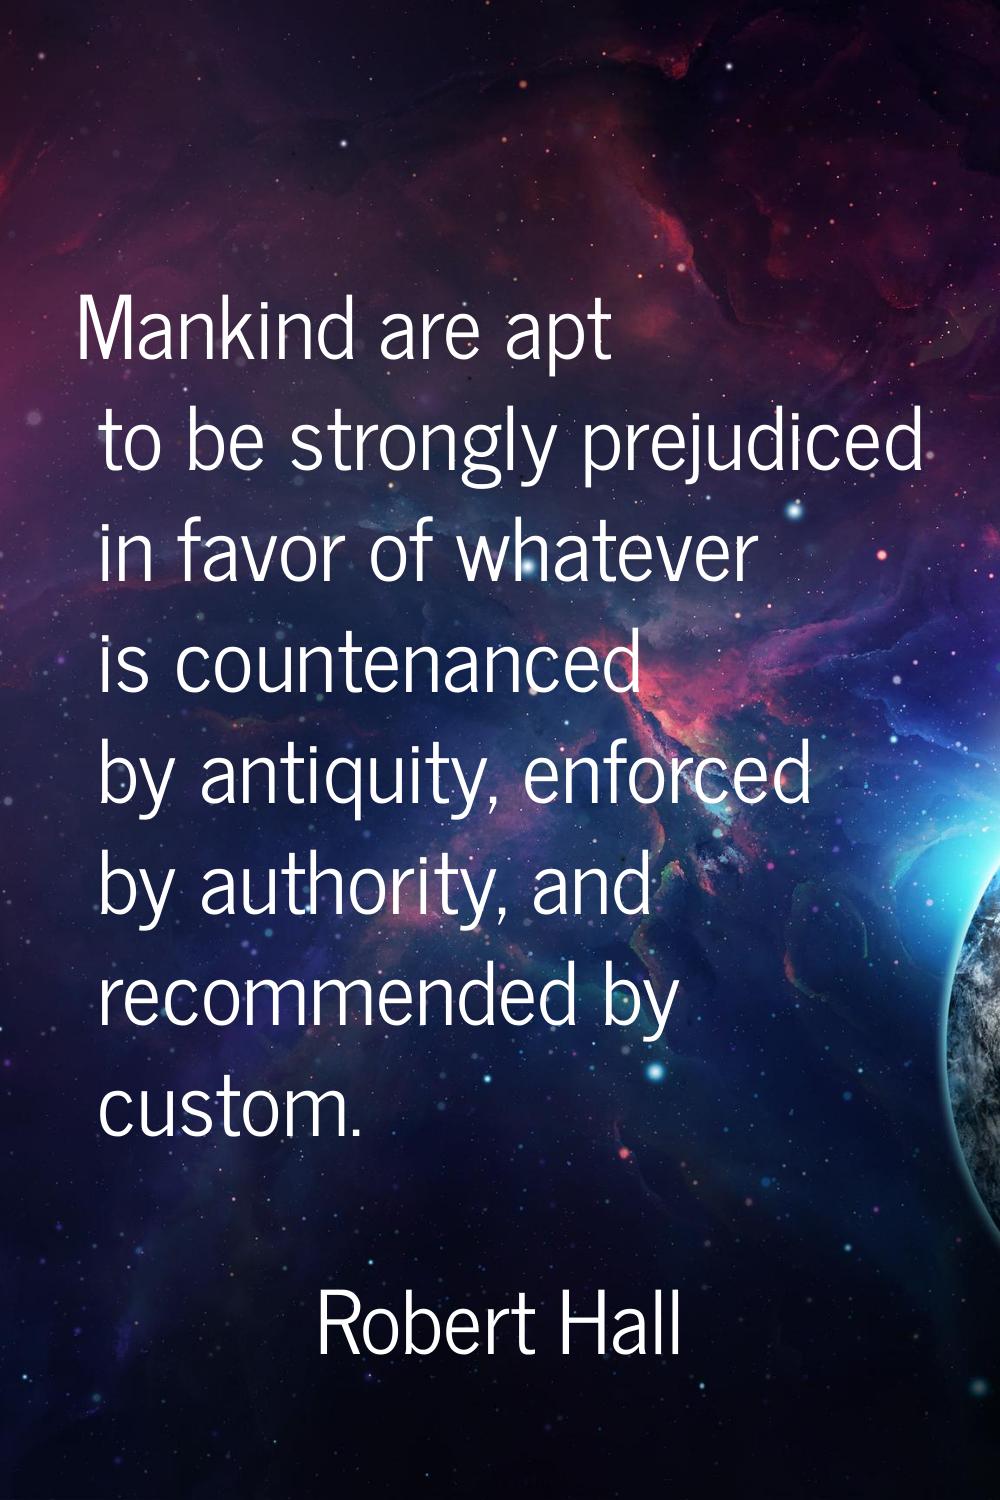 Mankind are apt to be strongly prejudiced in favor of whatever is countenanced by antiquity, enforc